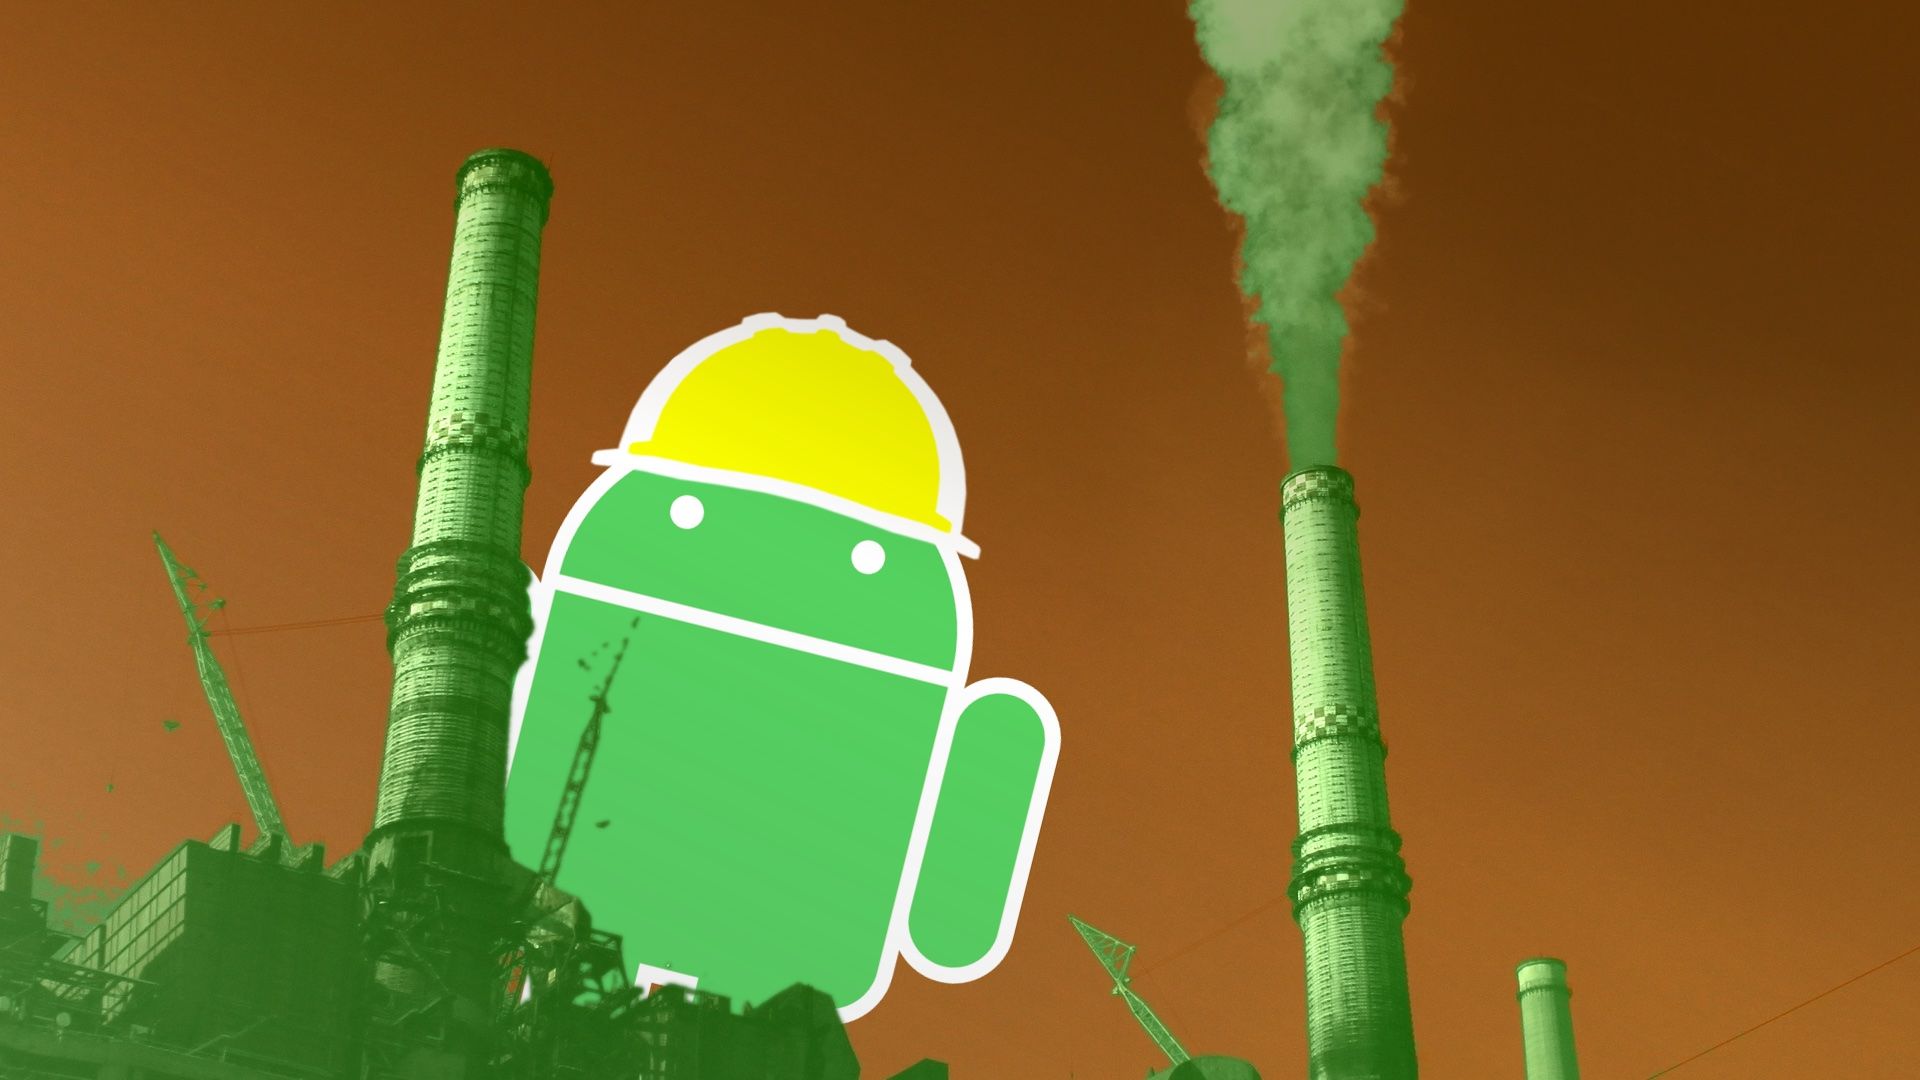 Google's Bugdroid looming over large green pipes